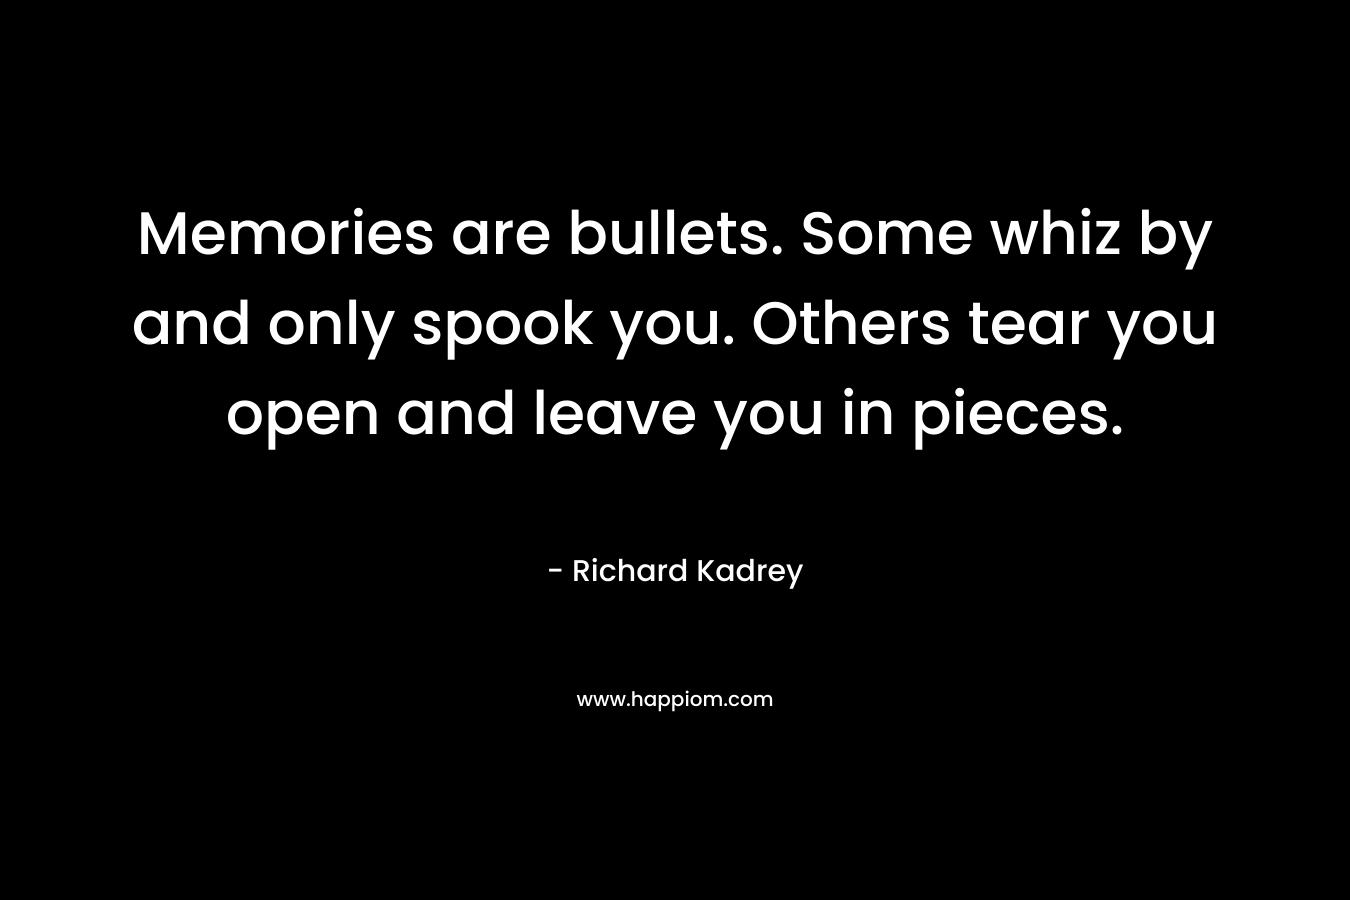 Memories are bullets. Some whiz by and only spook you. Others tear you open and leave you in pieces.